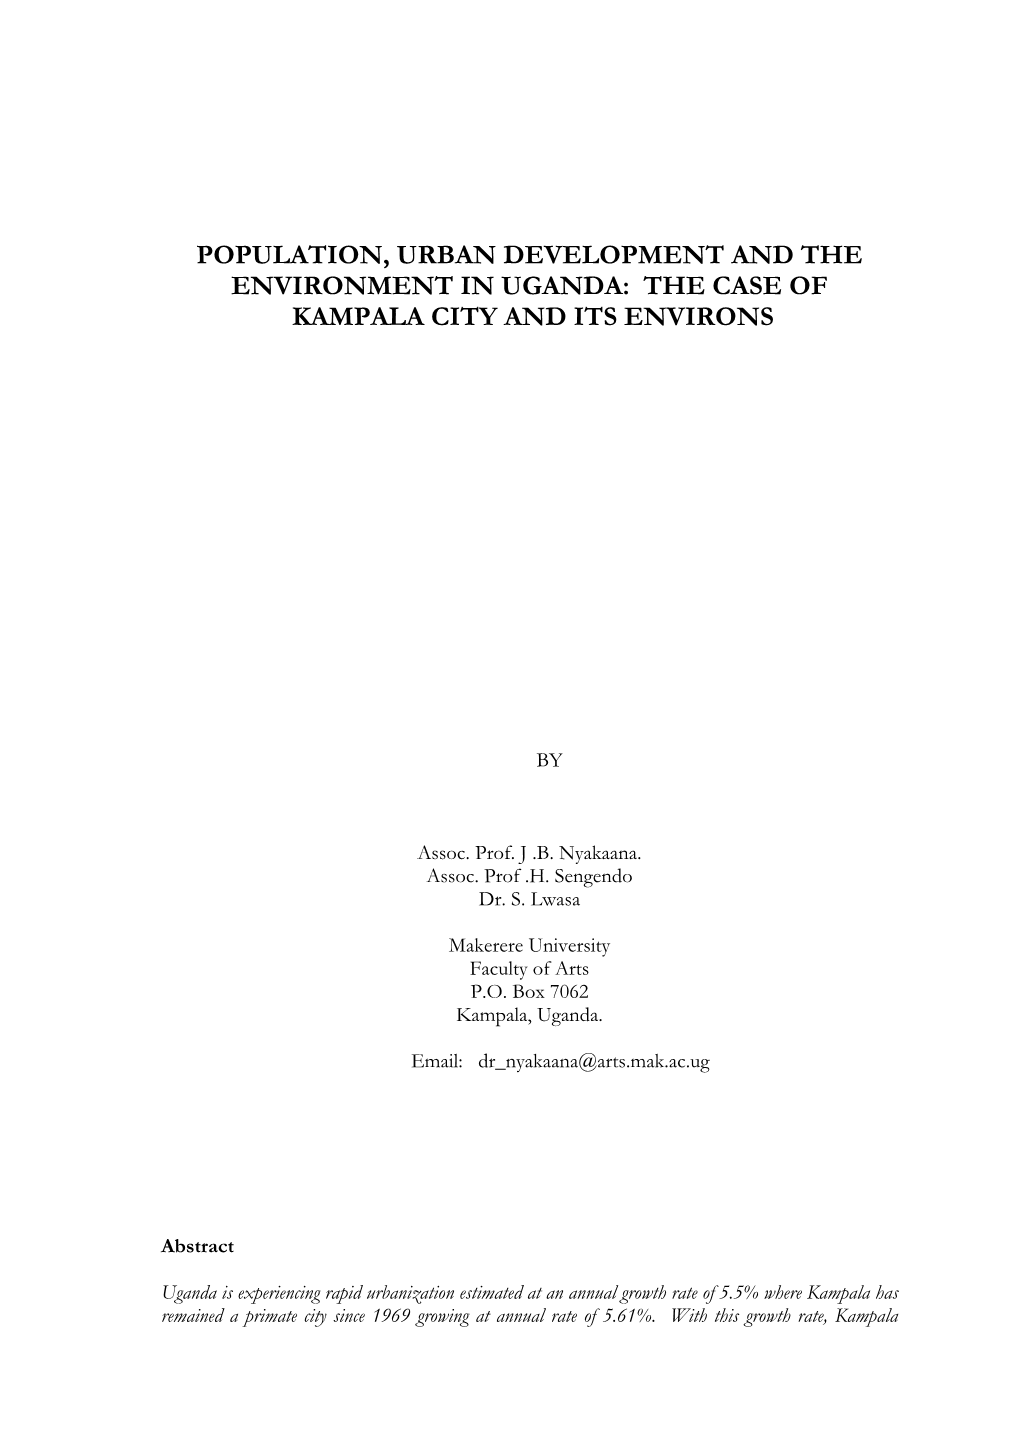 Population, Urban Development and the Environment in Uganda: the Case of Kampala City and Its Environs